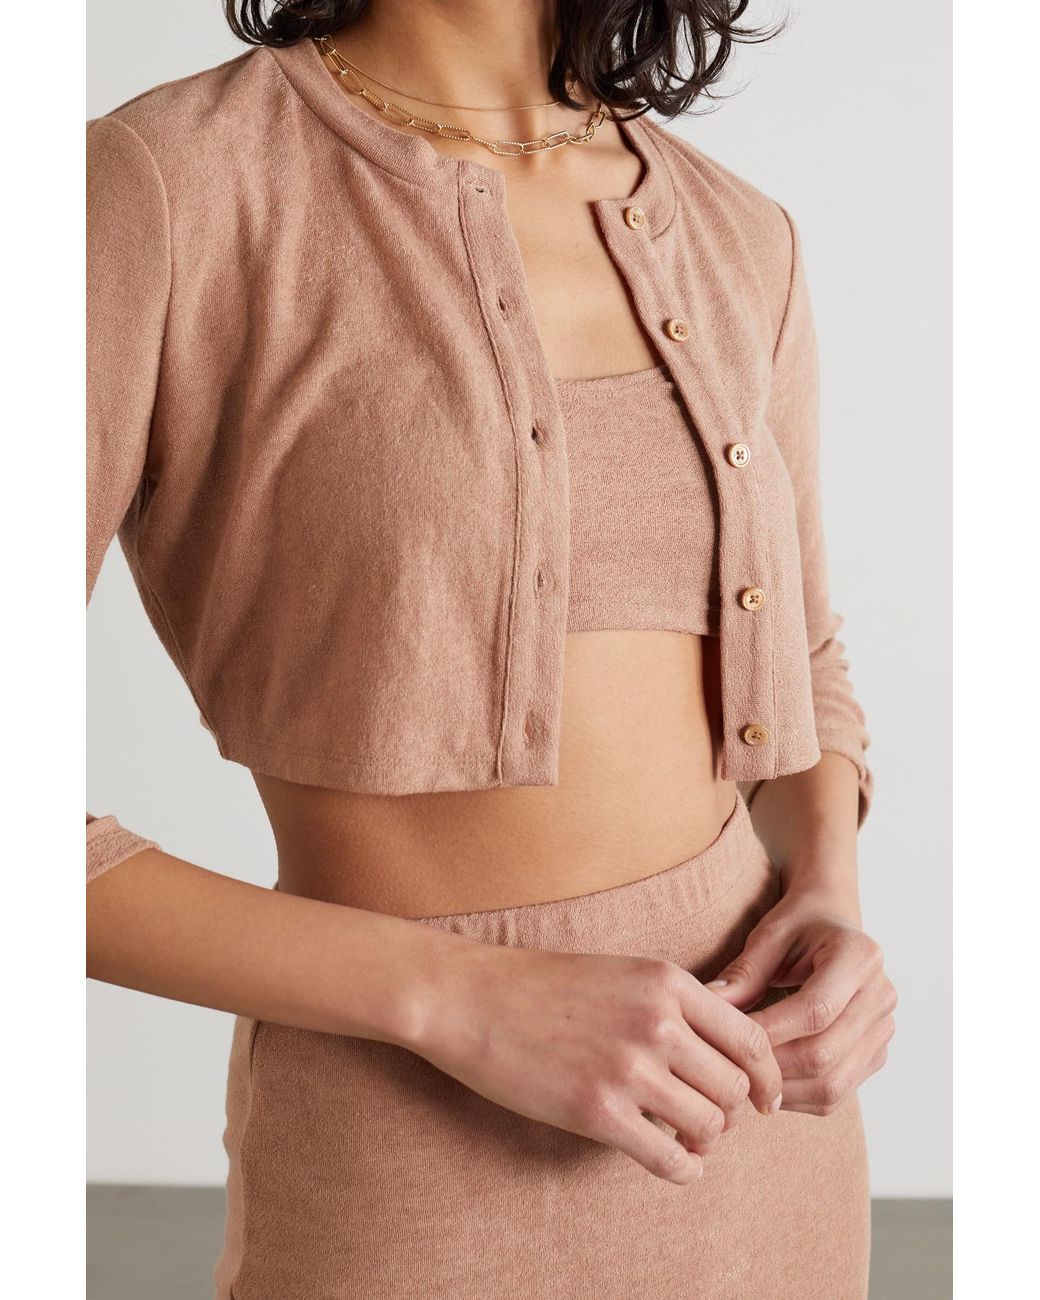 Reformation + Net Sustain Janice Knitted Cardigan, Camisole And Midi Skirt  Set in Brown | Lyst